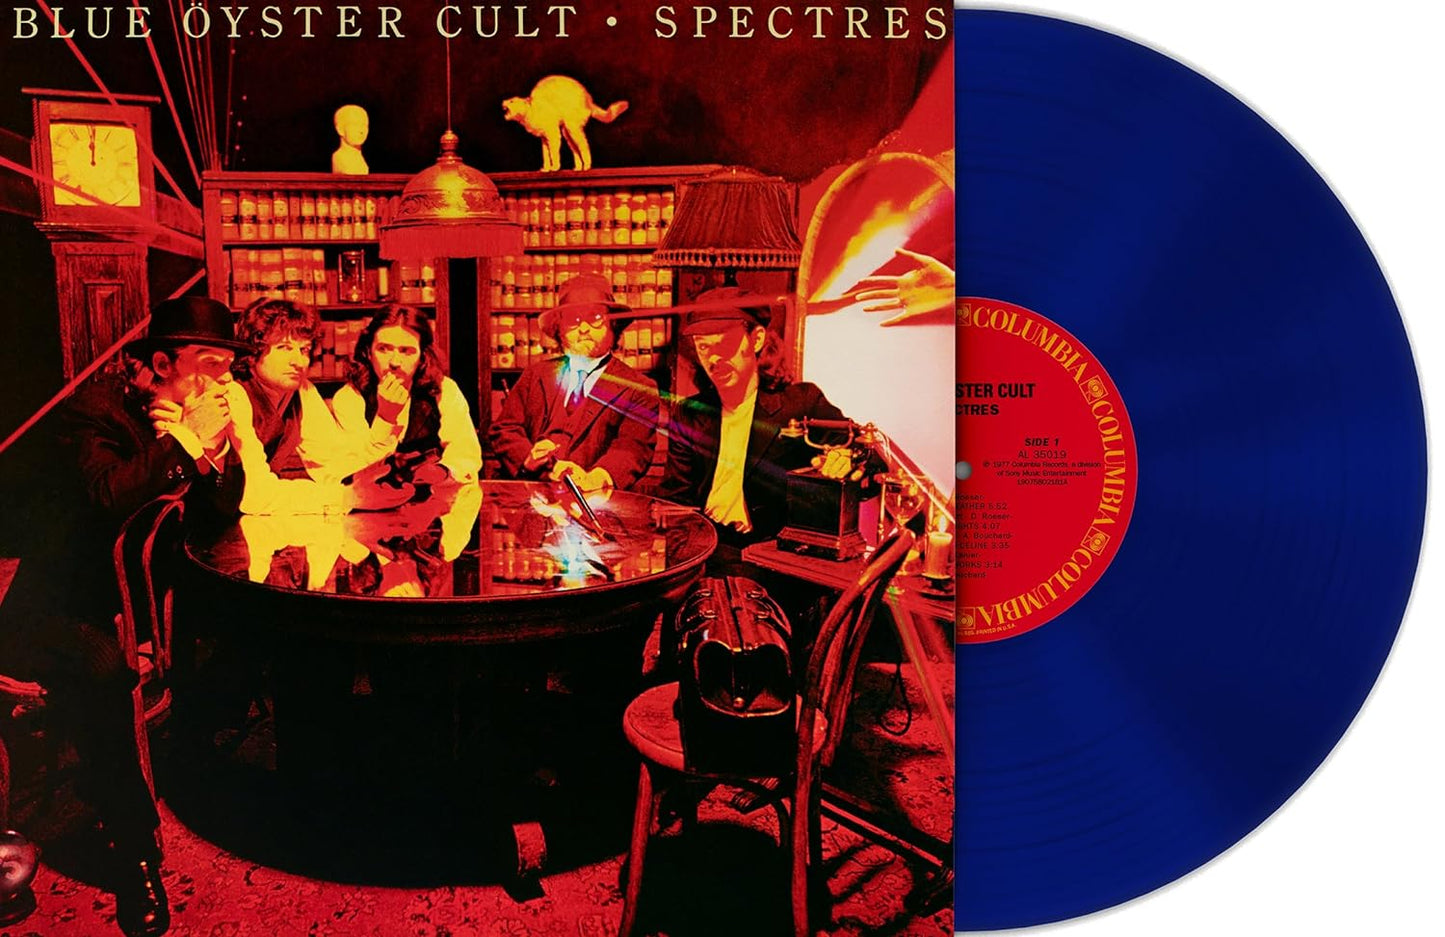 Blue Öyster Cult – Spectres  collector's edition limited to 2,000 copies worldwide